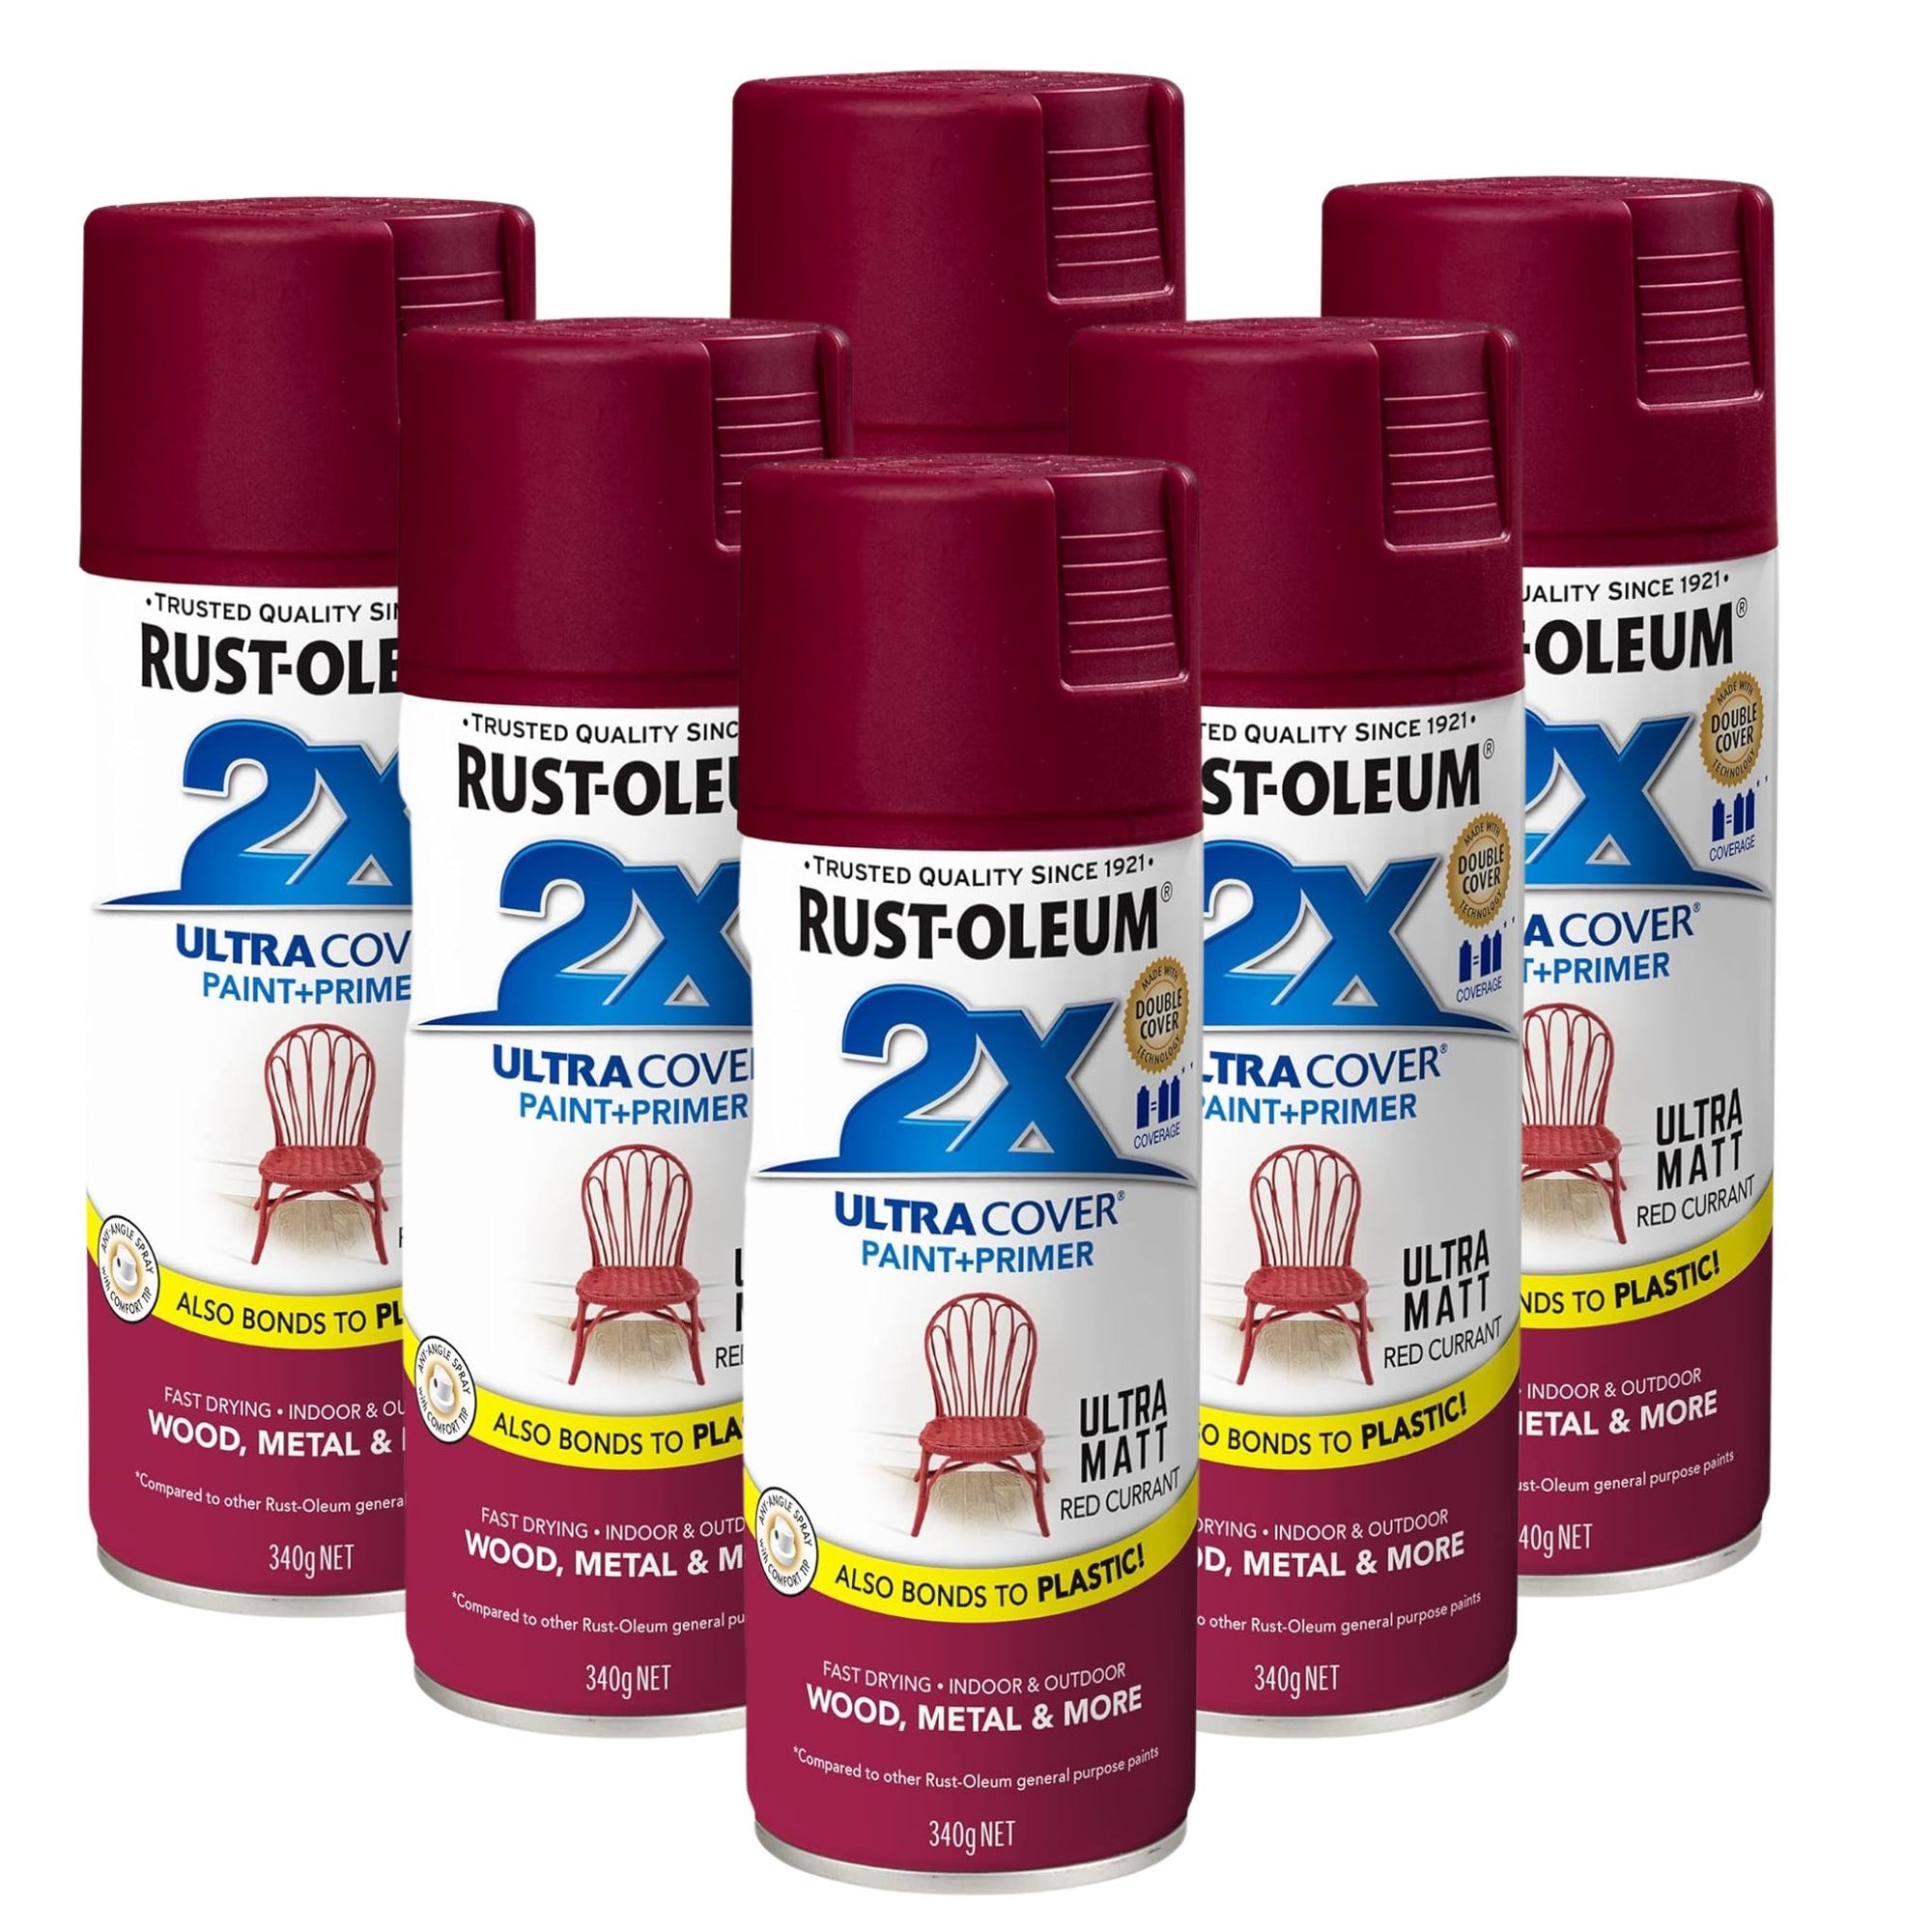 Rust Oleum 2X Ultra Cover Matt Spray, Red Currant, 340 g,  357853 (6 cans) - South East Clearance Centre